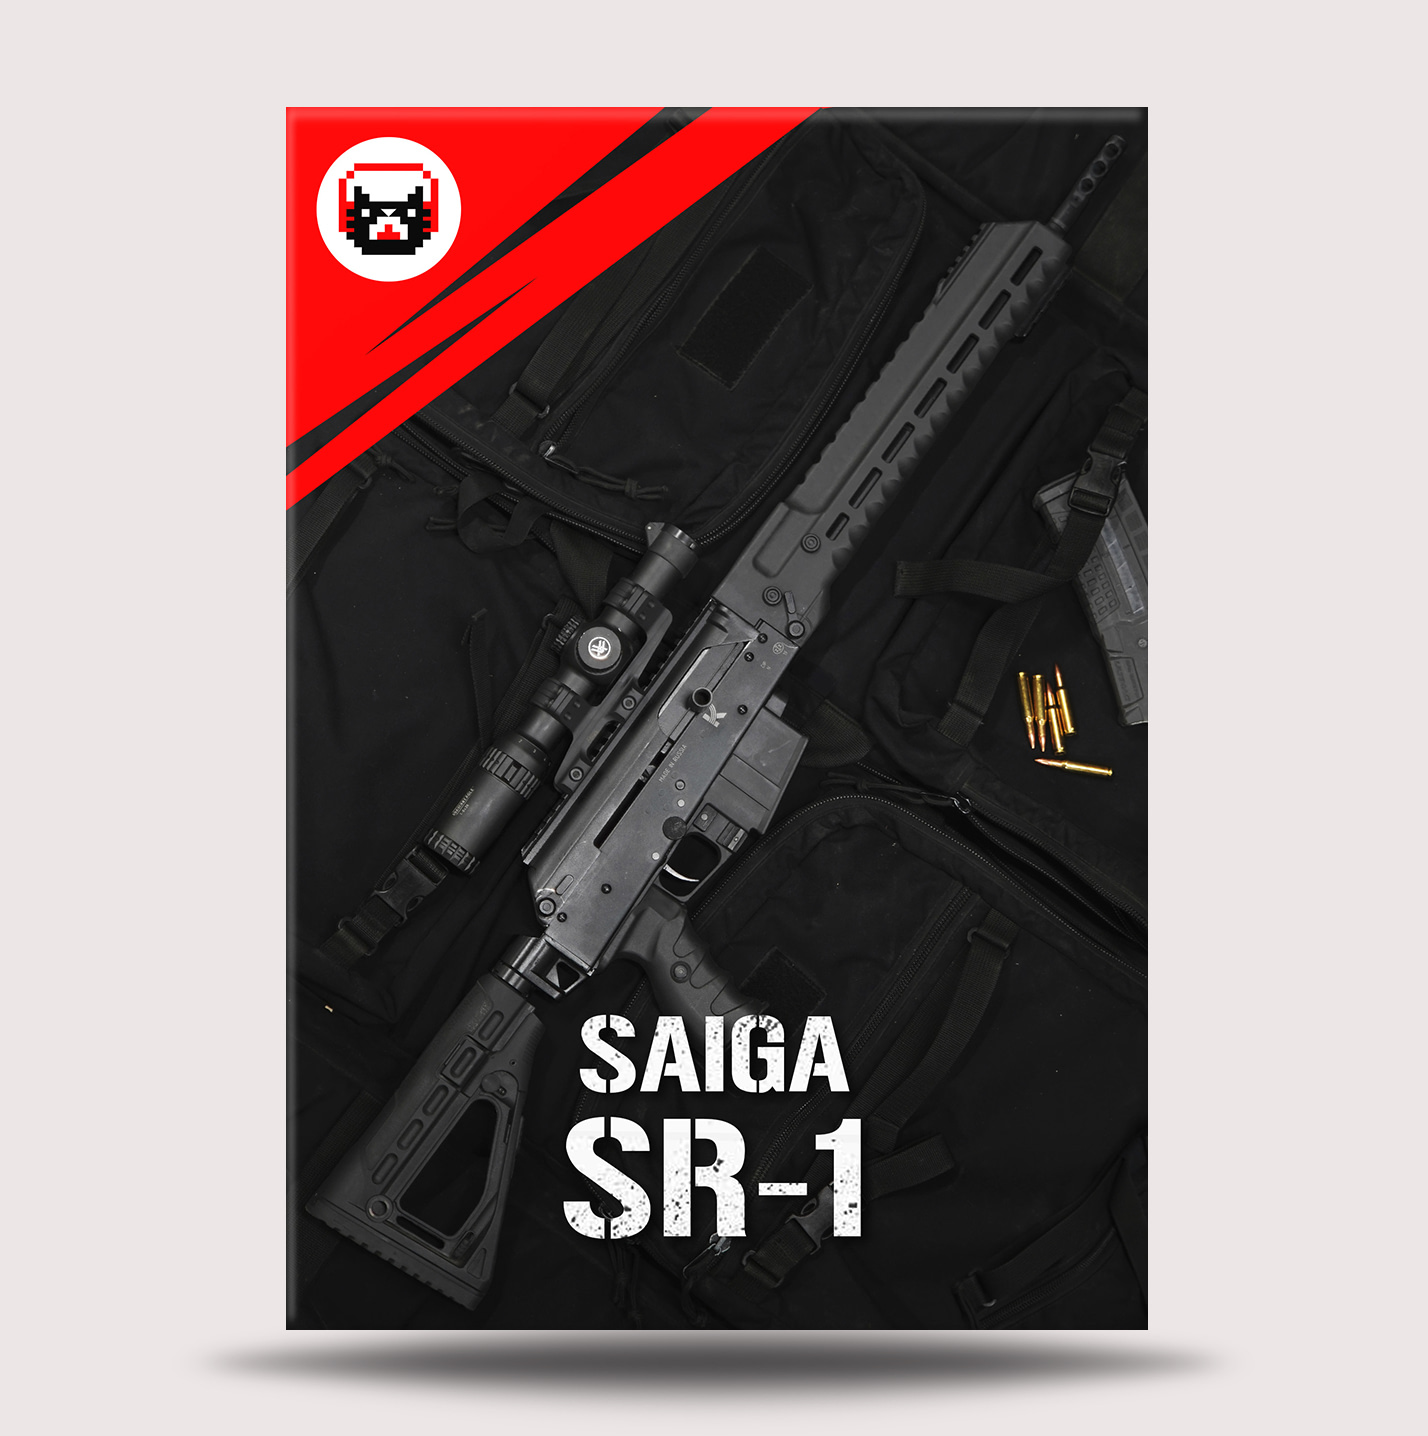 Saiga SR-1 | Weapon Sound Effects Library | Asoundeffect.com